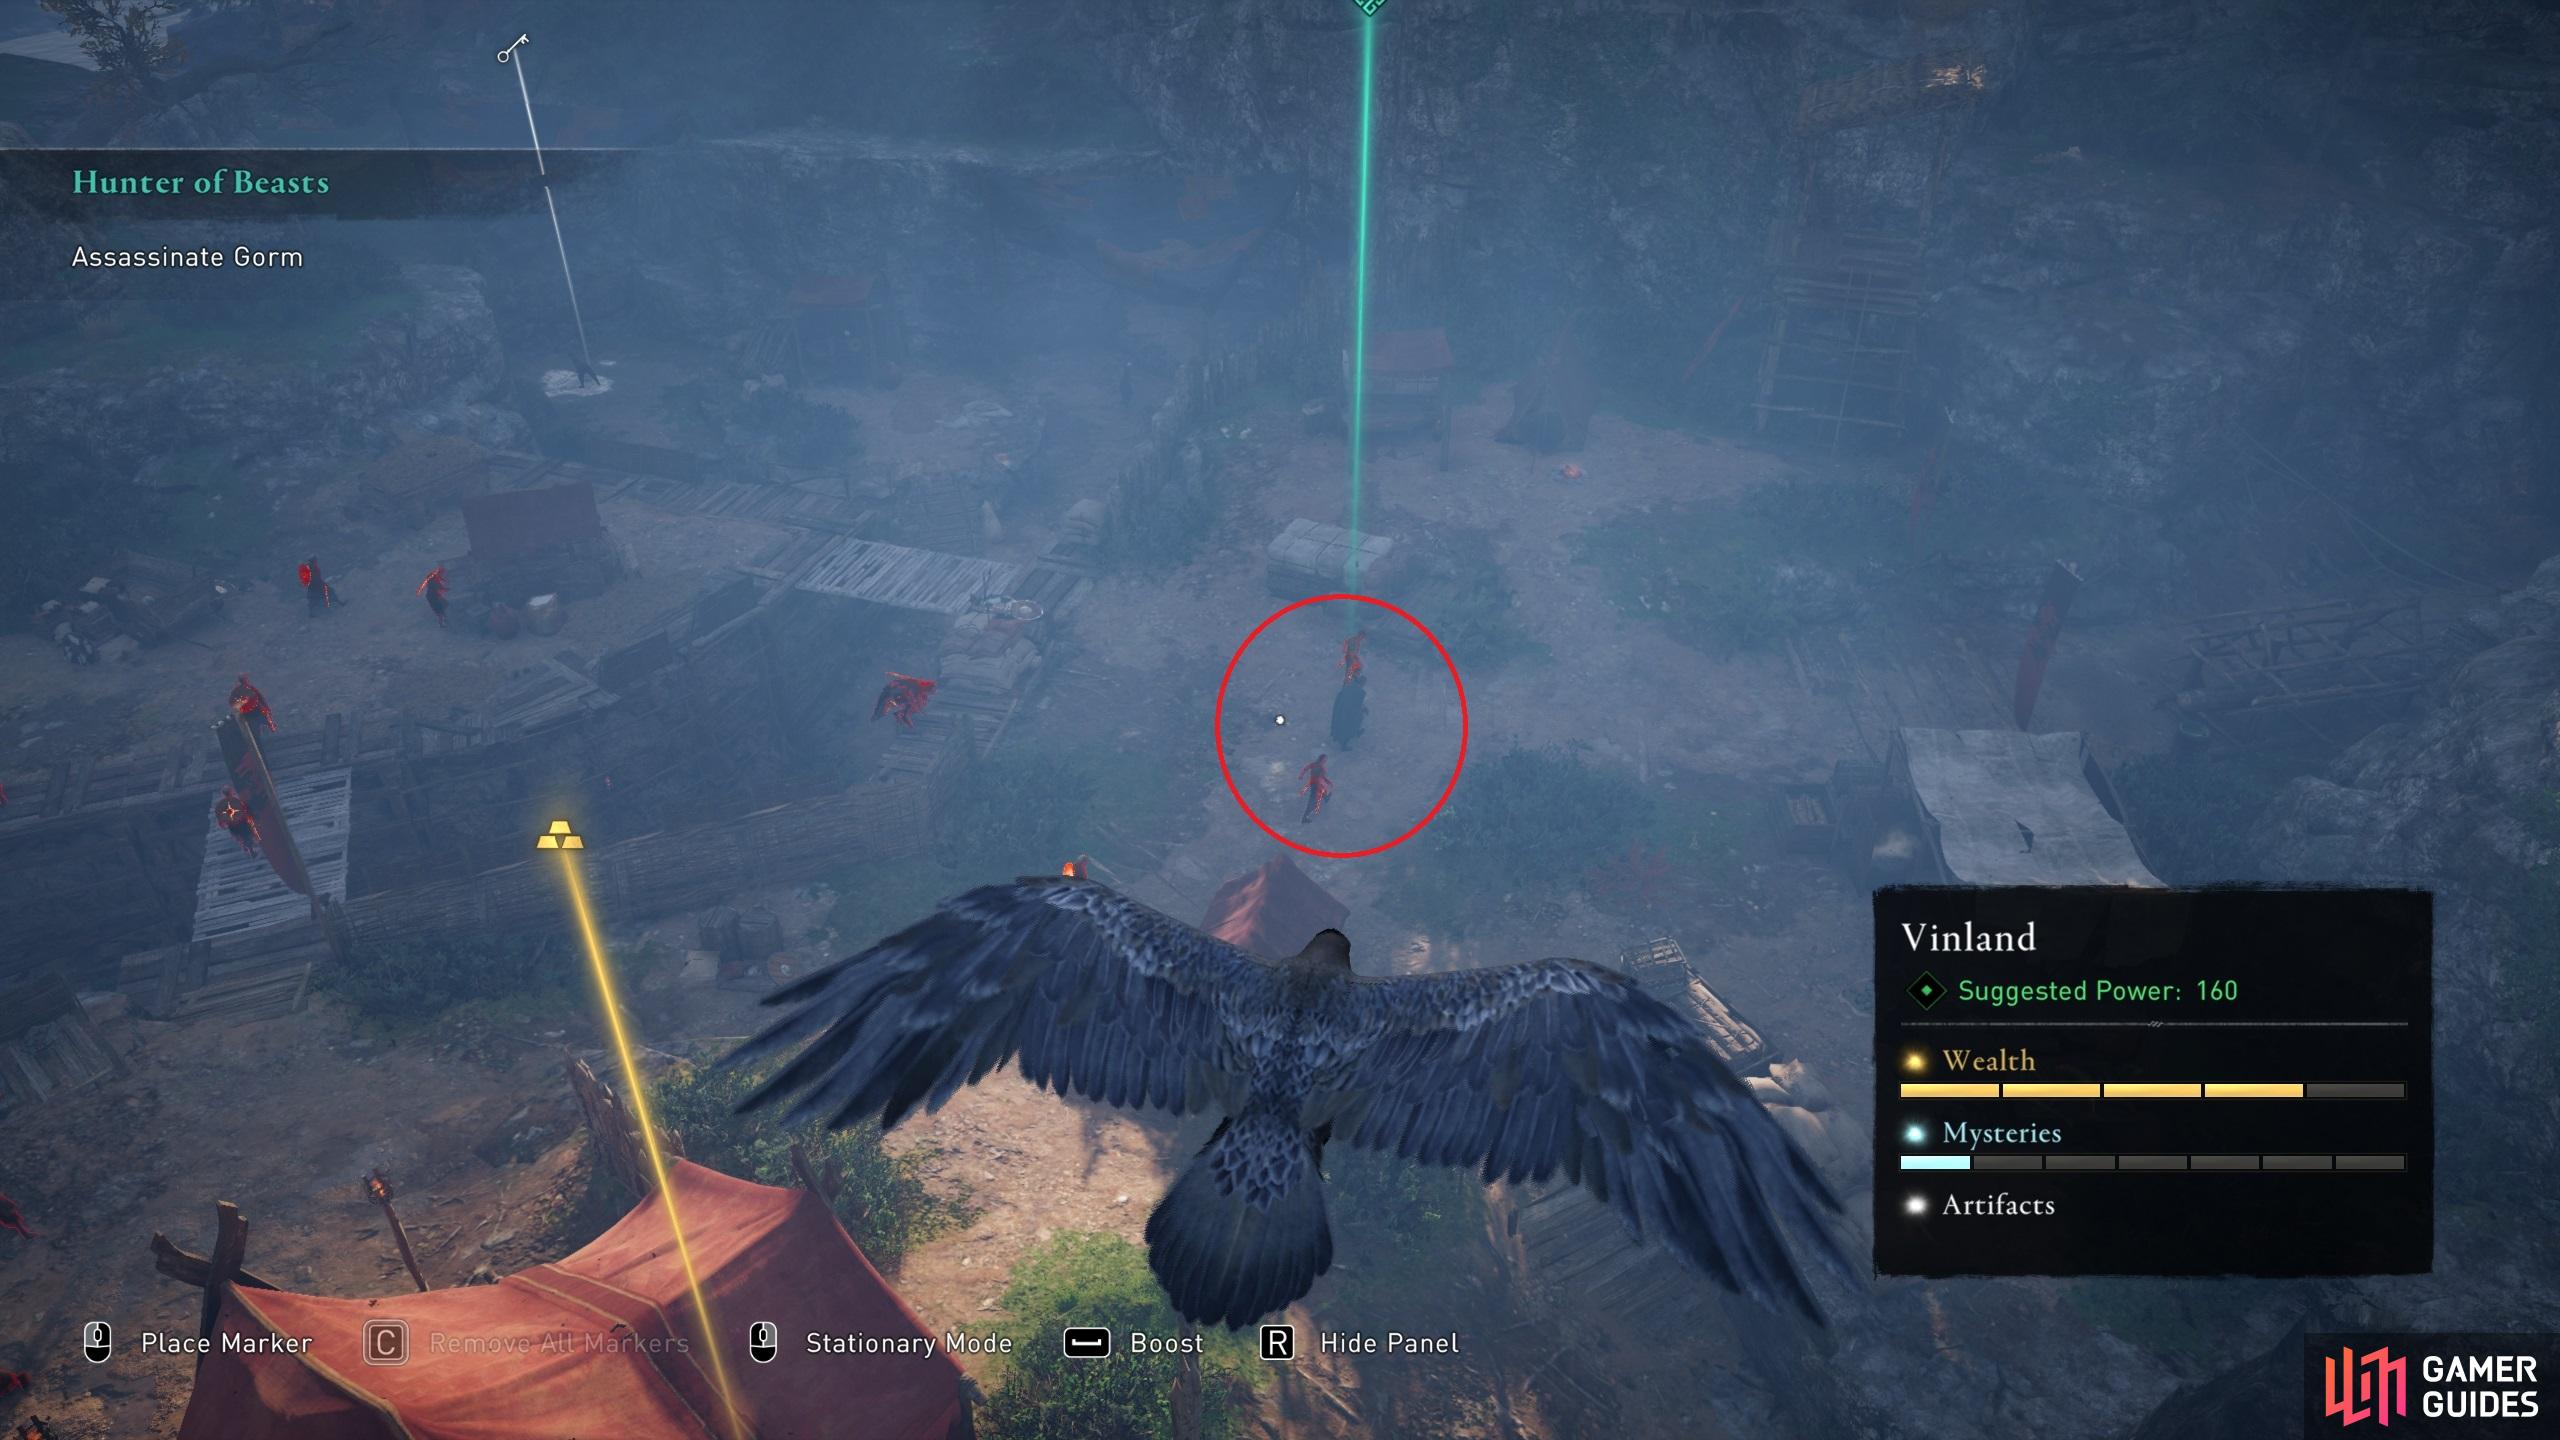 Use your raven to identify the location of Gorm within Narfljot Camp.